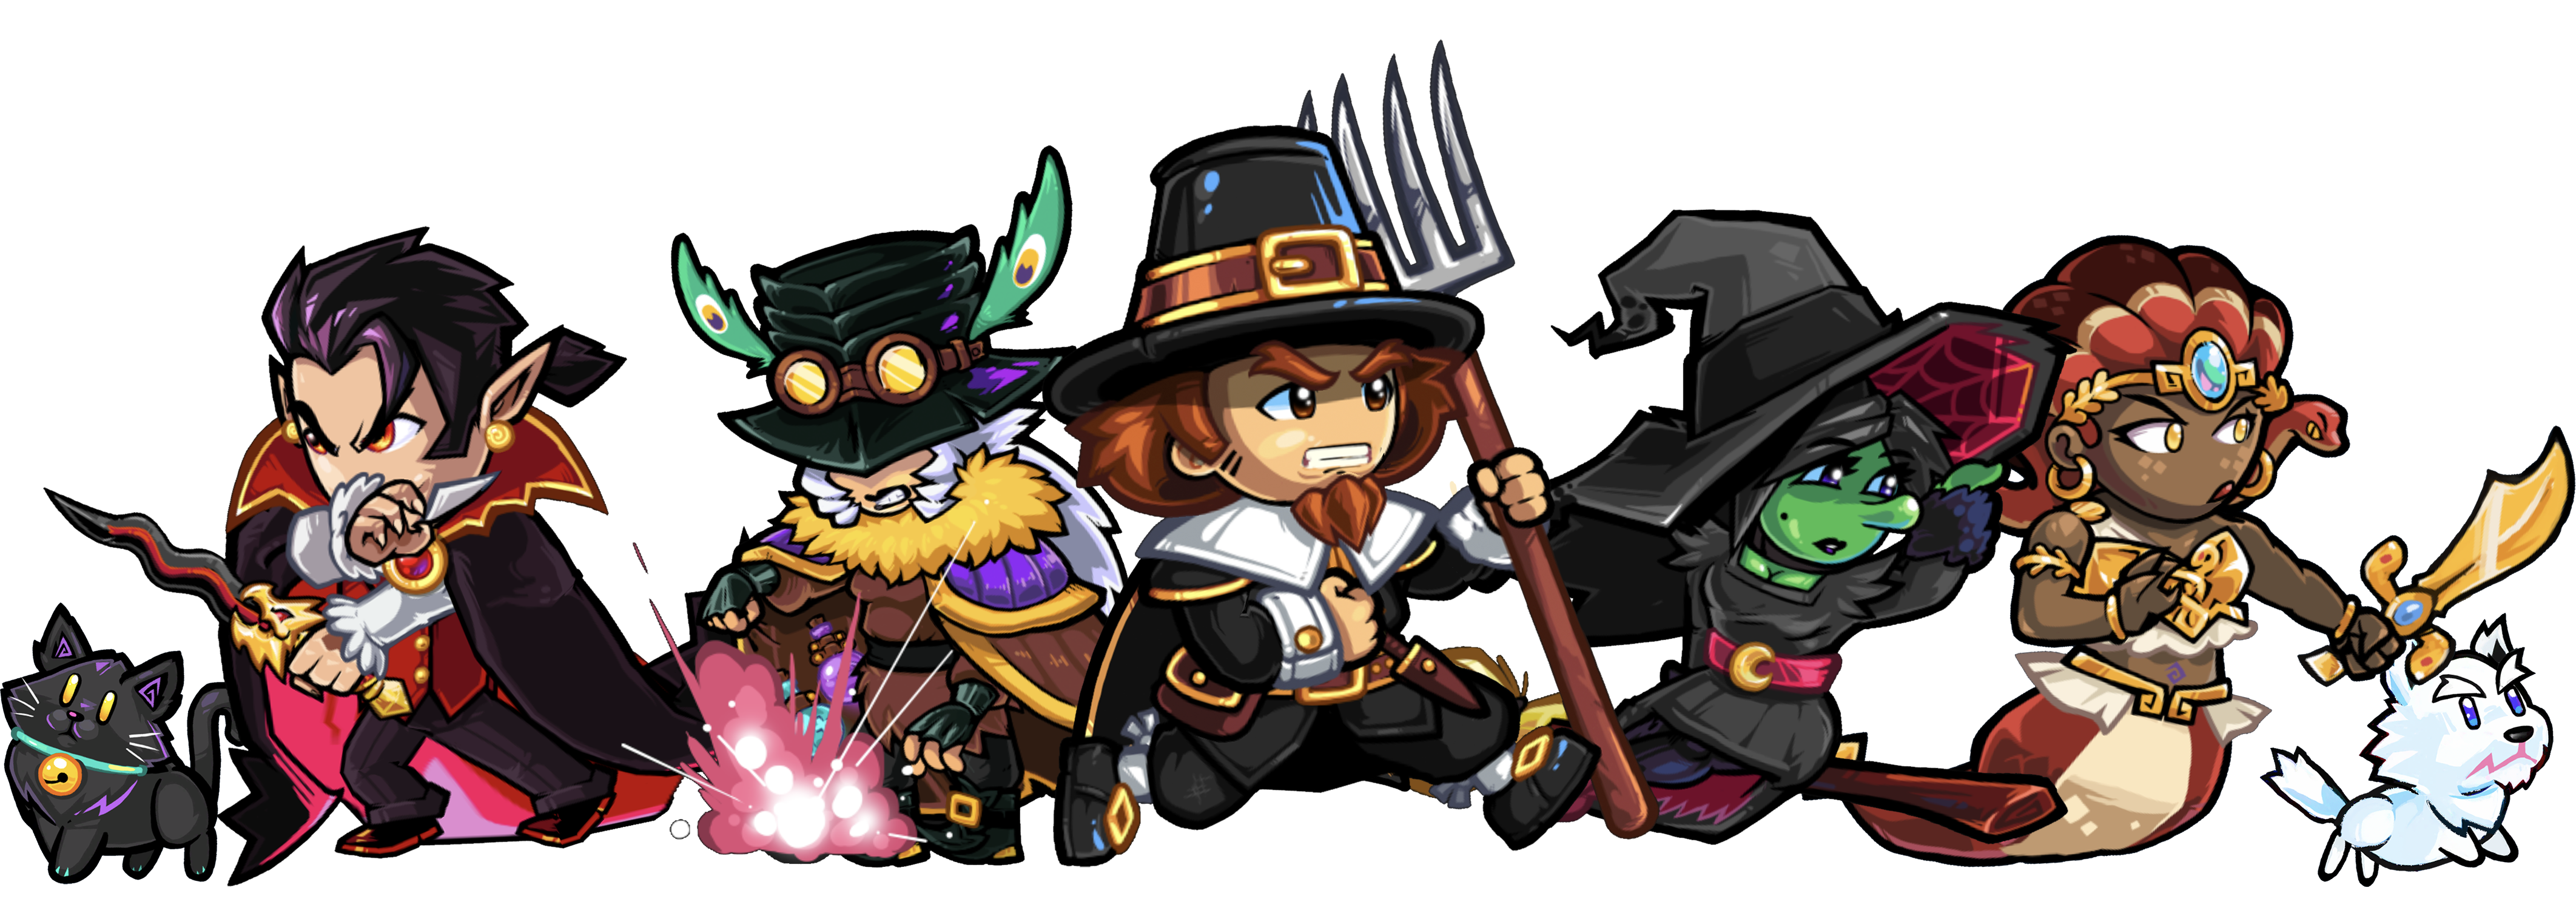 Town of Salem 2 Early Access Announced, New Details Revealed – GameSkinny